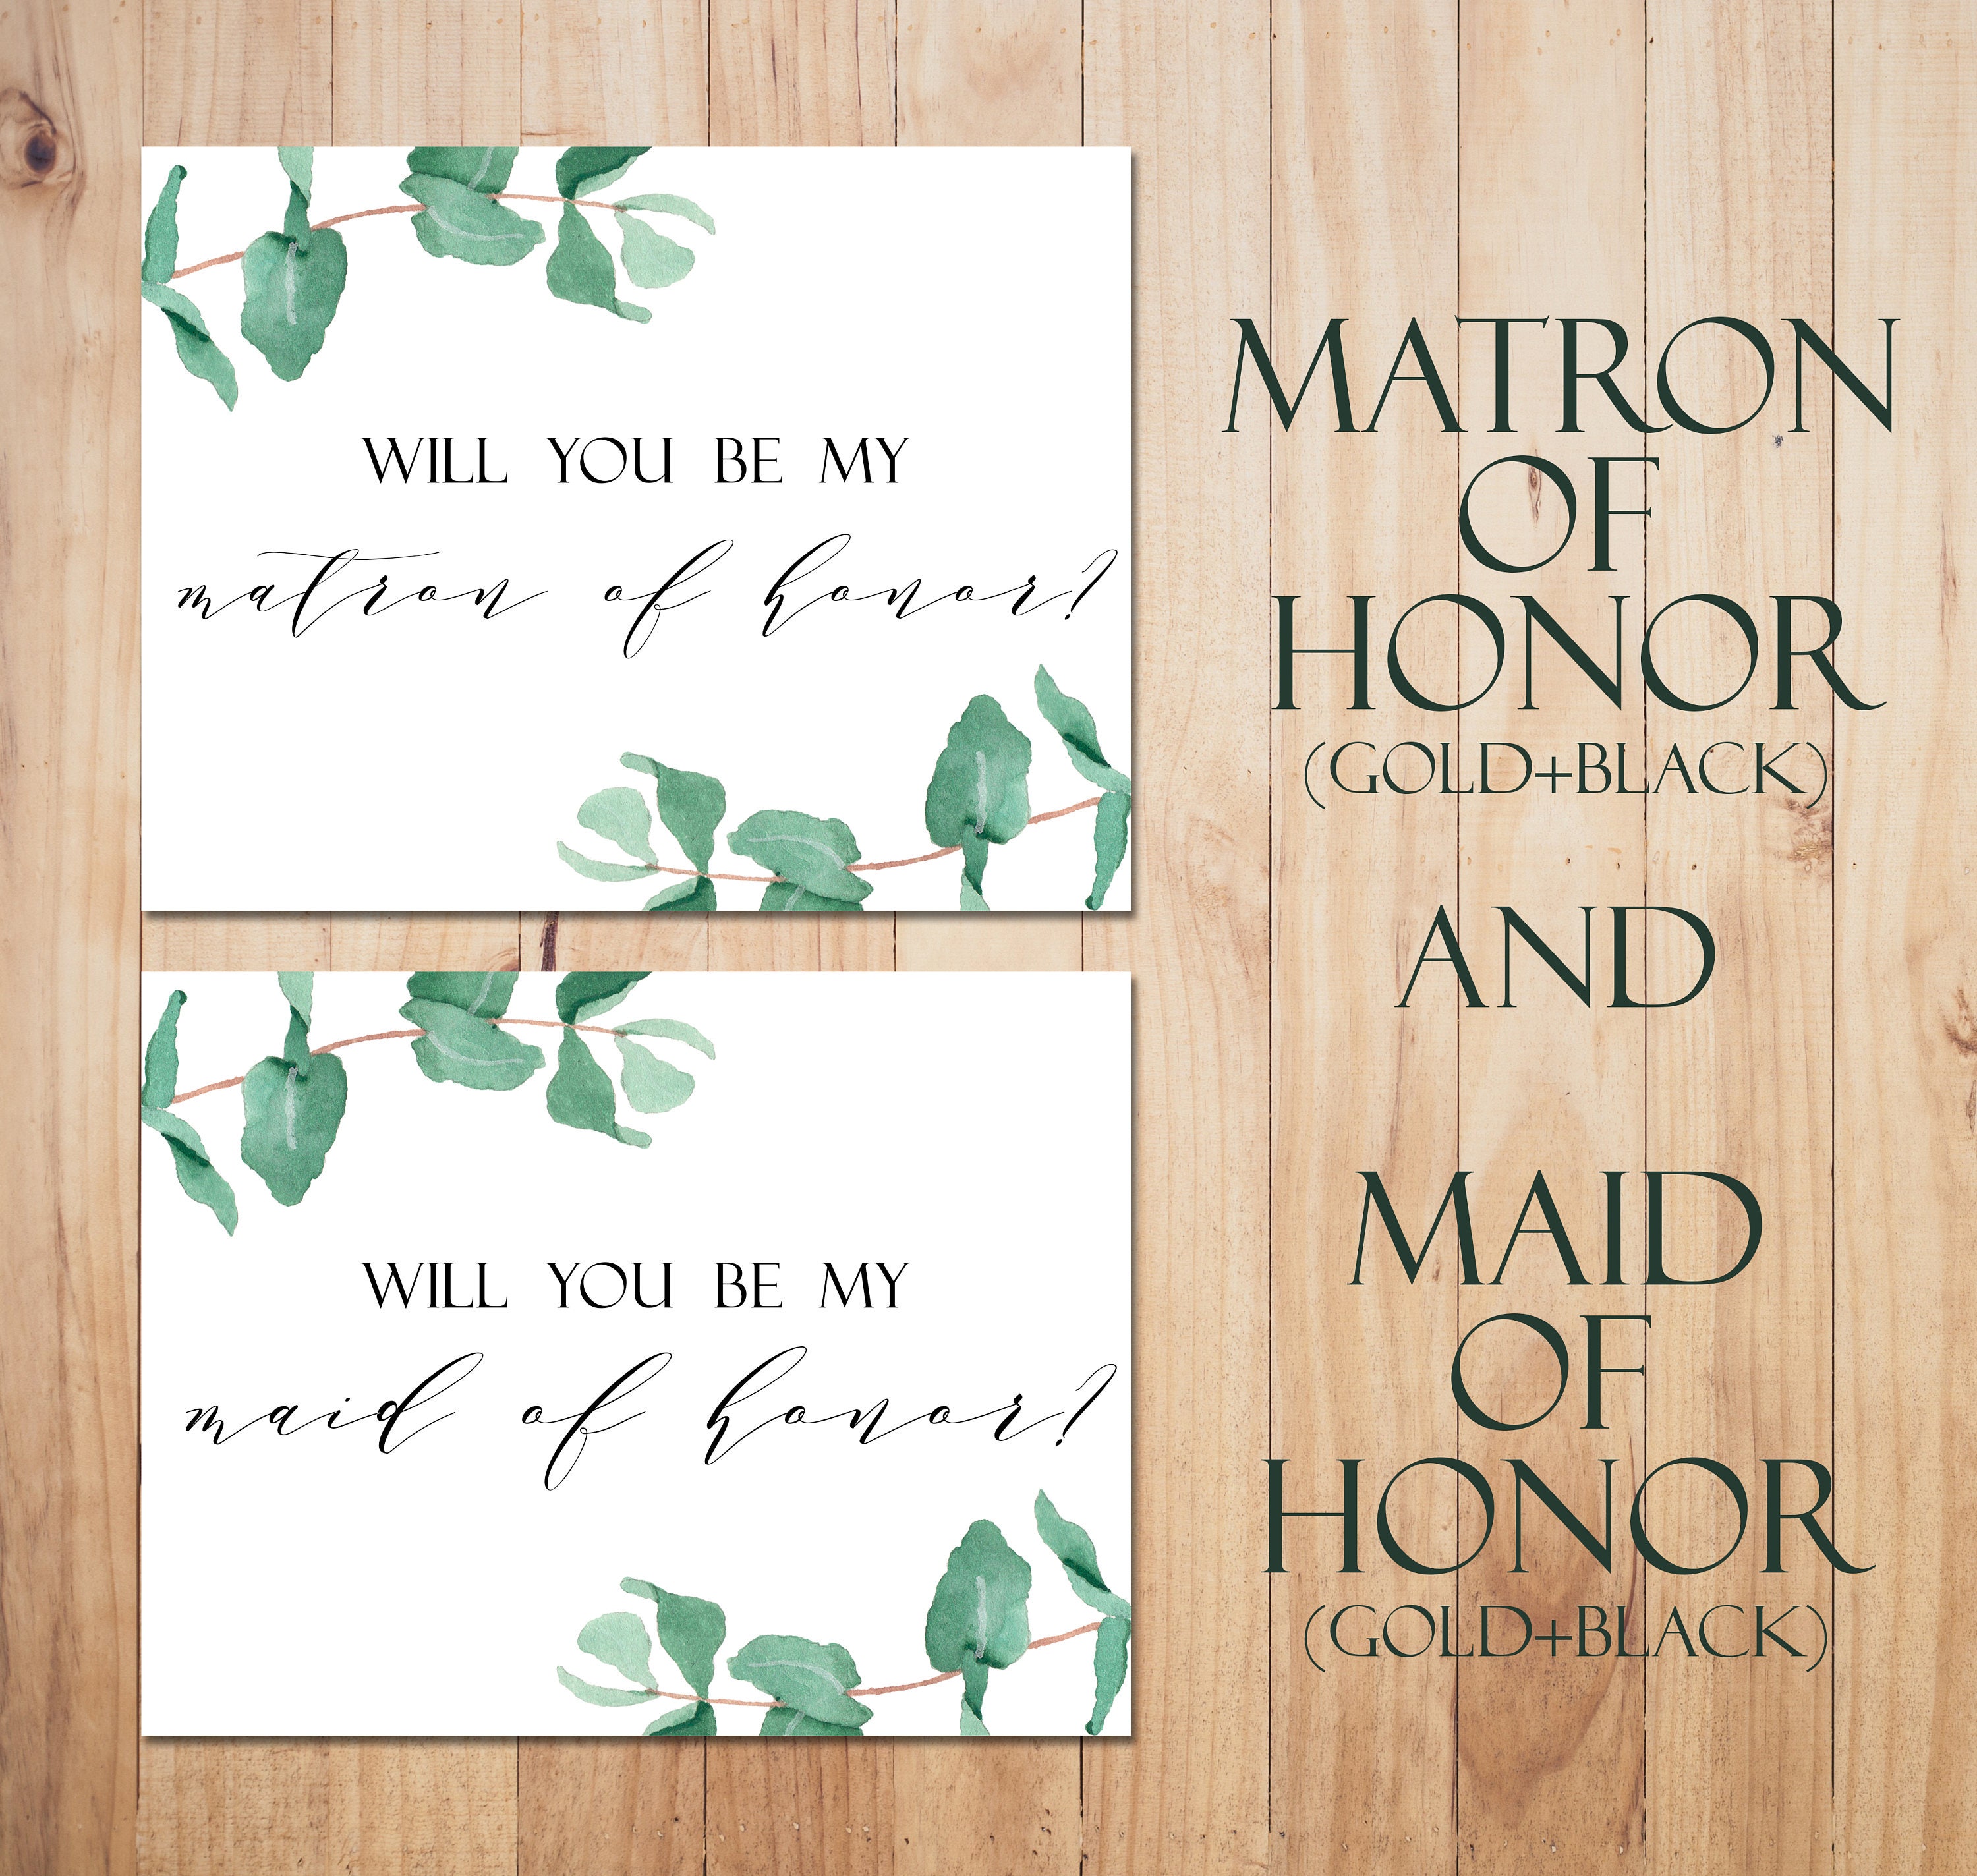 will-you-be-my-matron-of-honor-card-printable-maid-of-honor